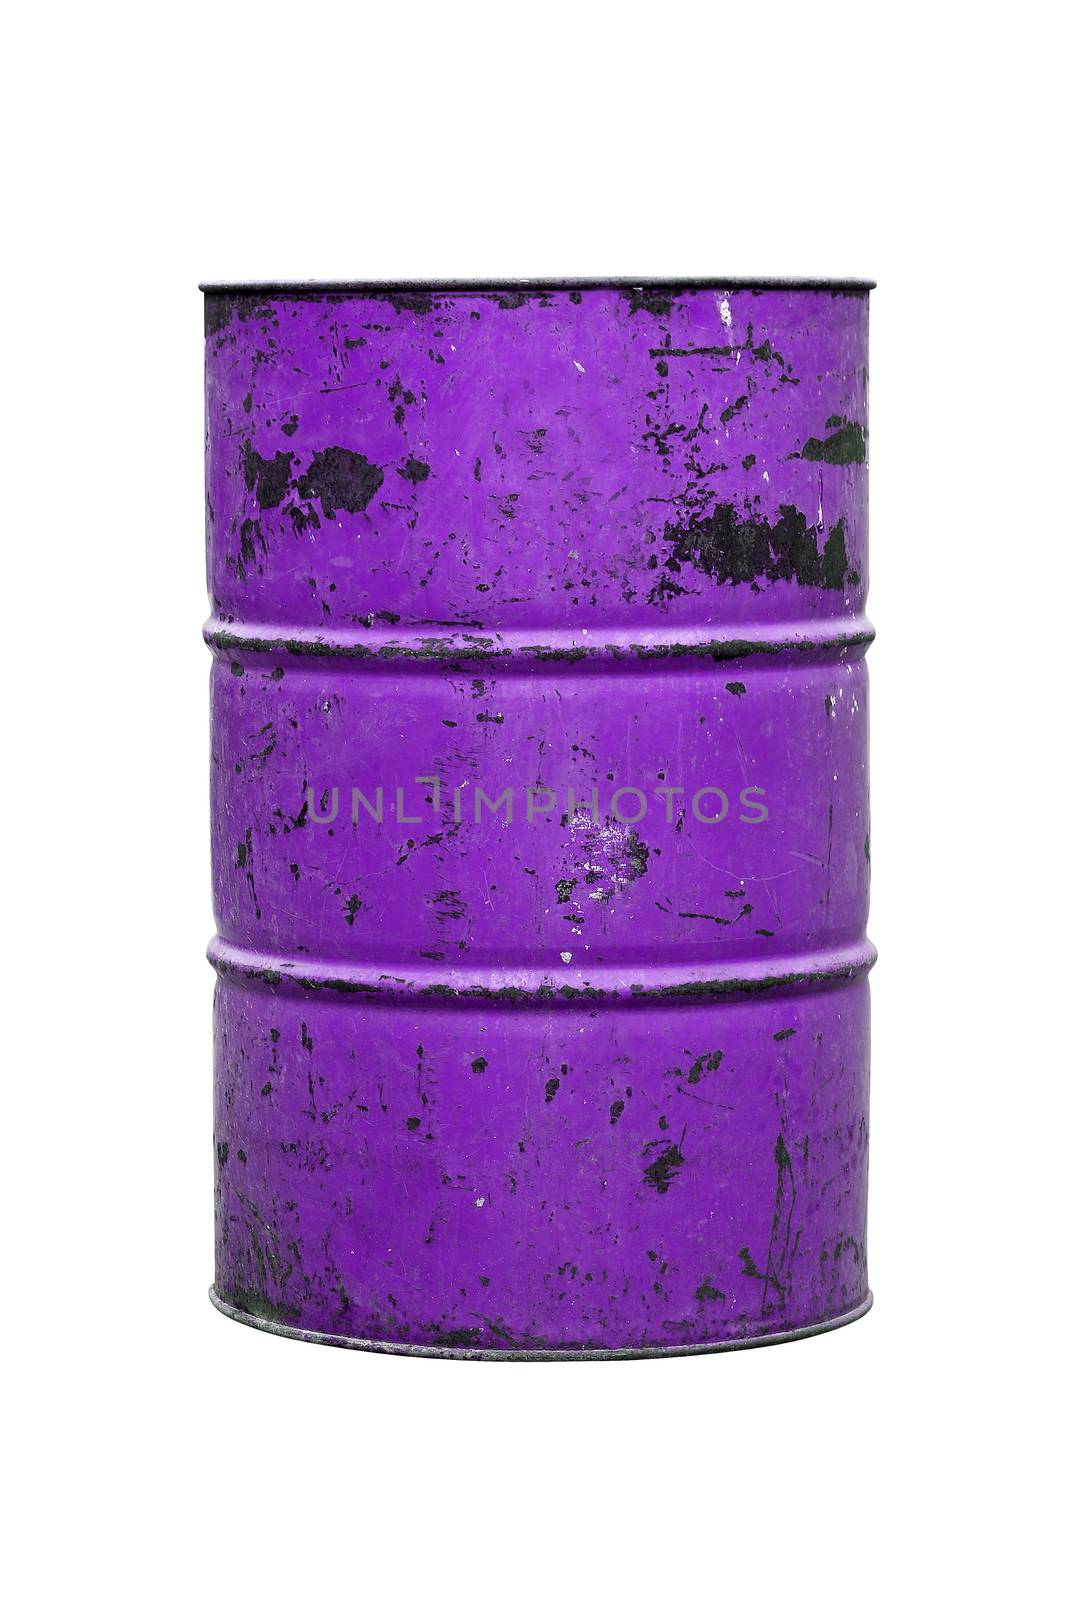 Barrel Oil purple Old isolated on background white by cgdeaw